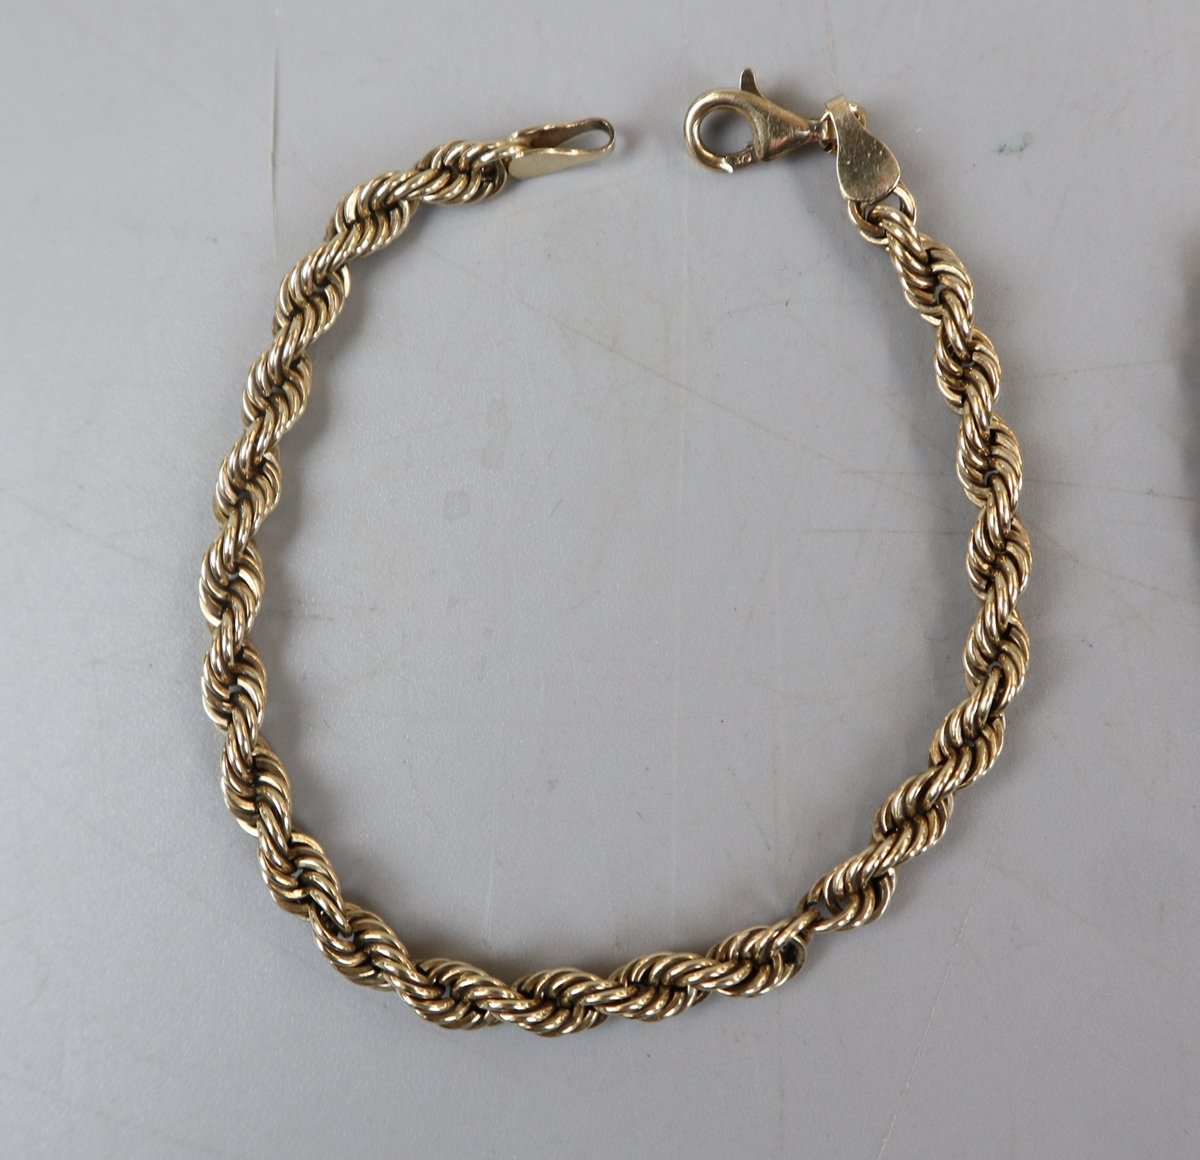 Pair of gold bracelets - Approx weight 21.4g - Image 2 of 3